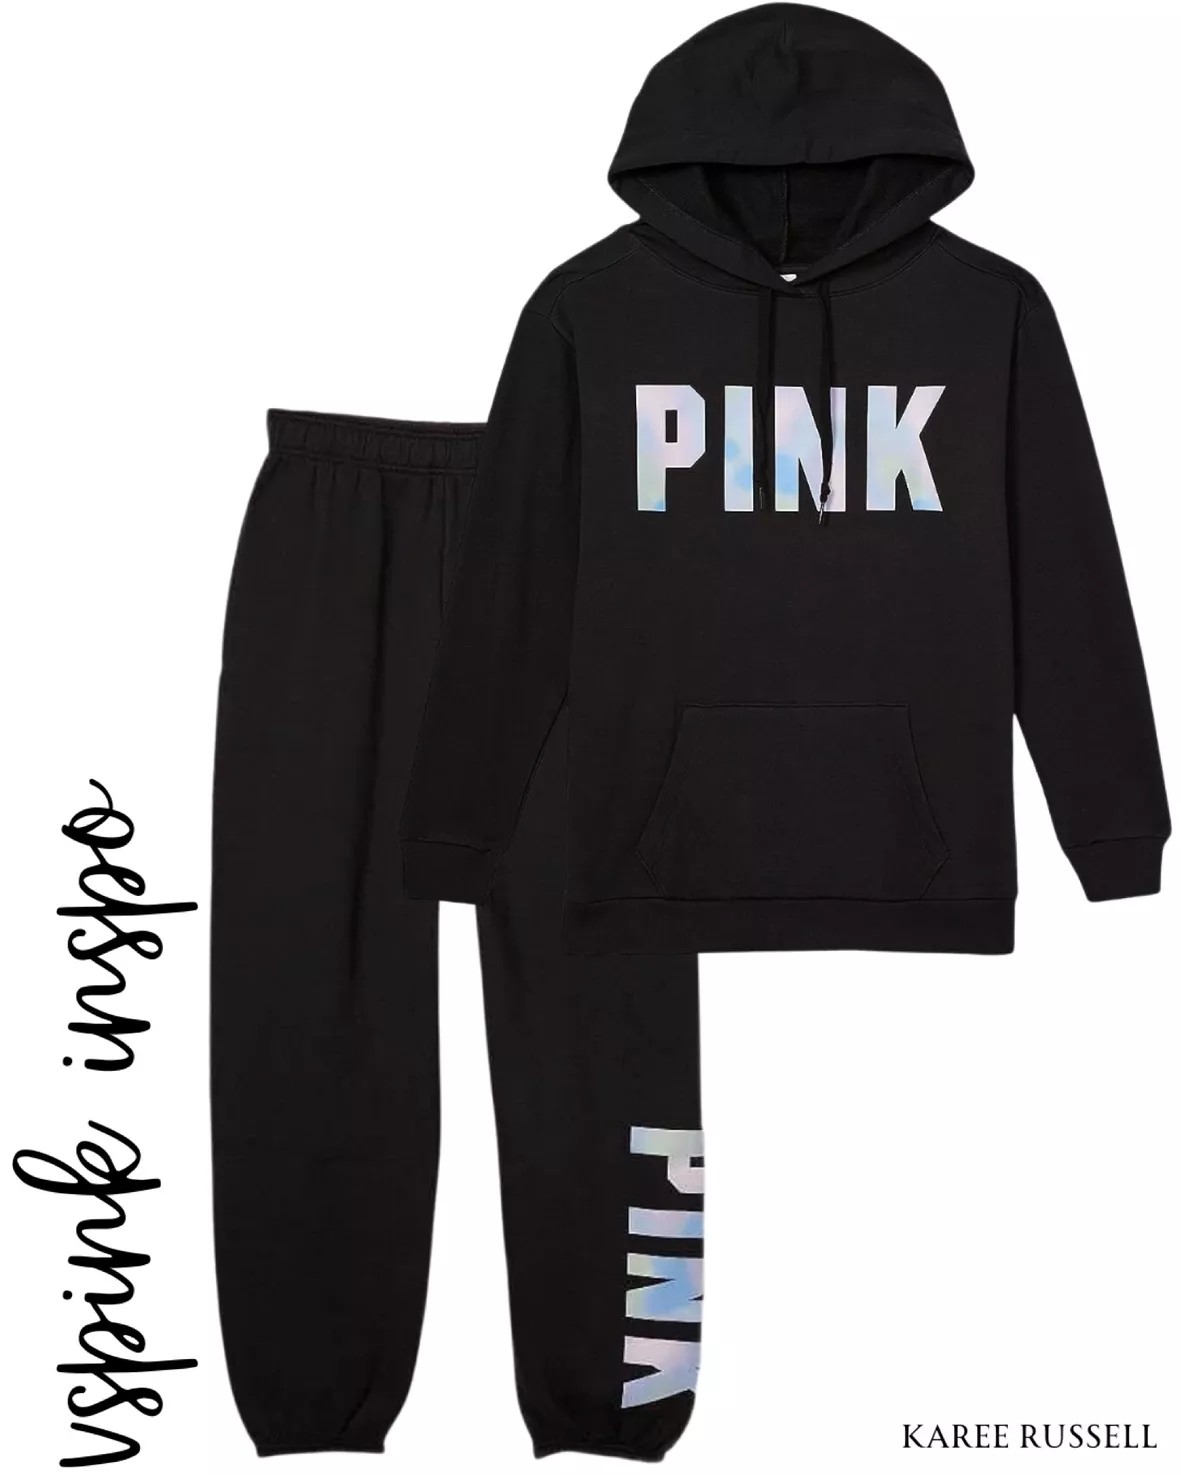 Visit the Victoria's Secret Store curated on LTK